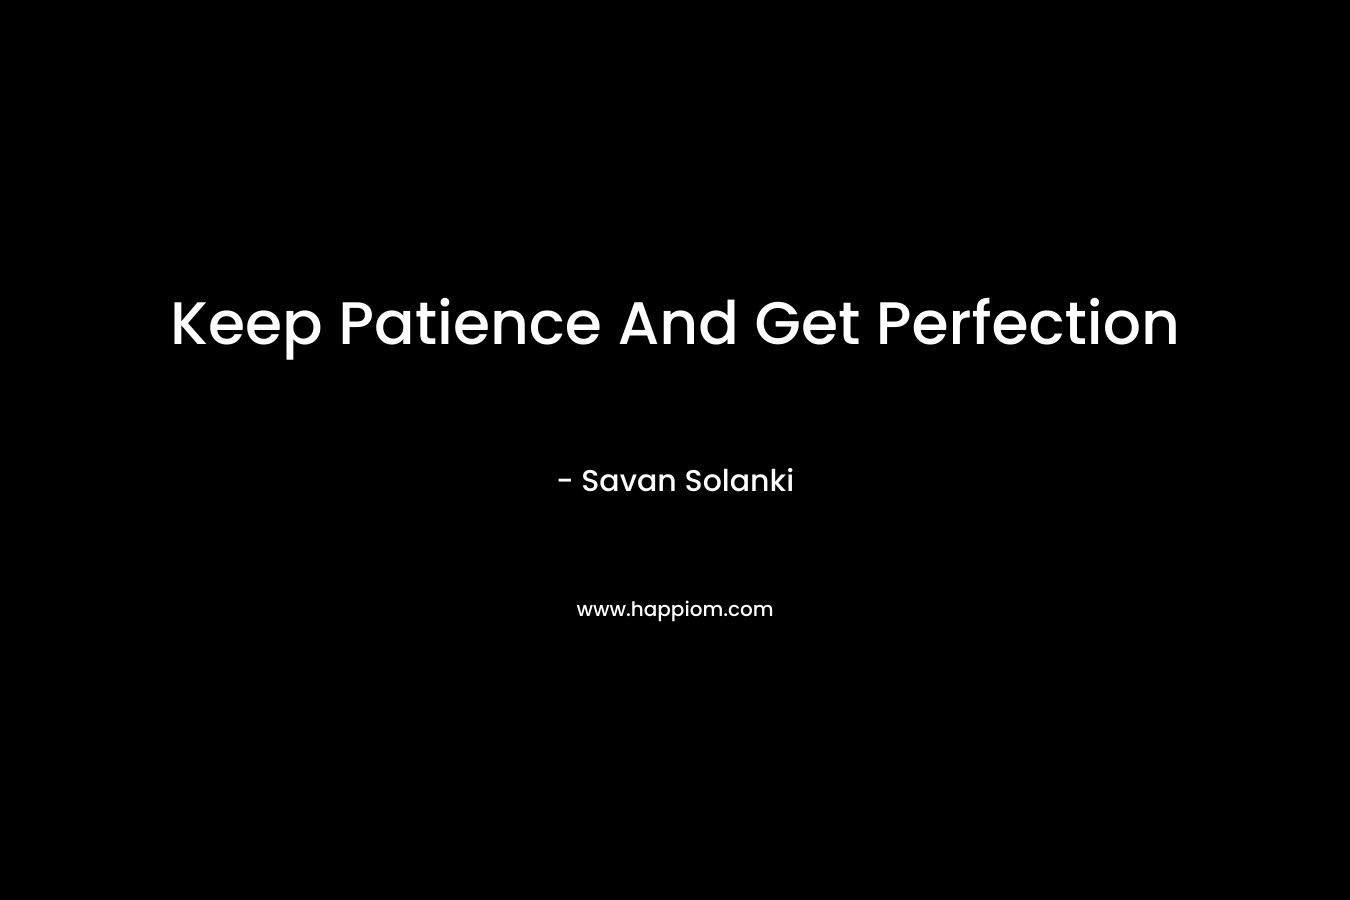 Keep Patience And Get Perfection